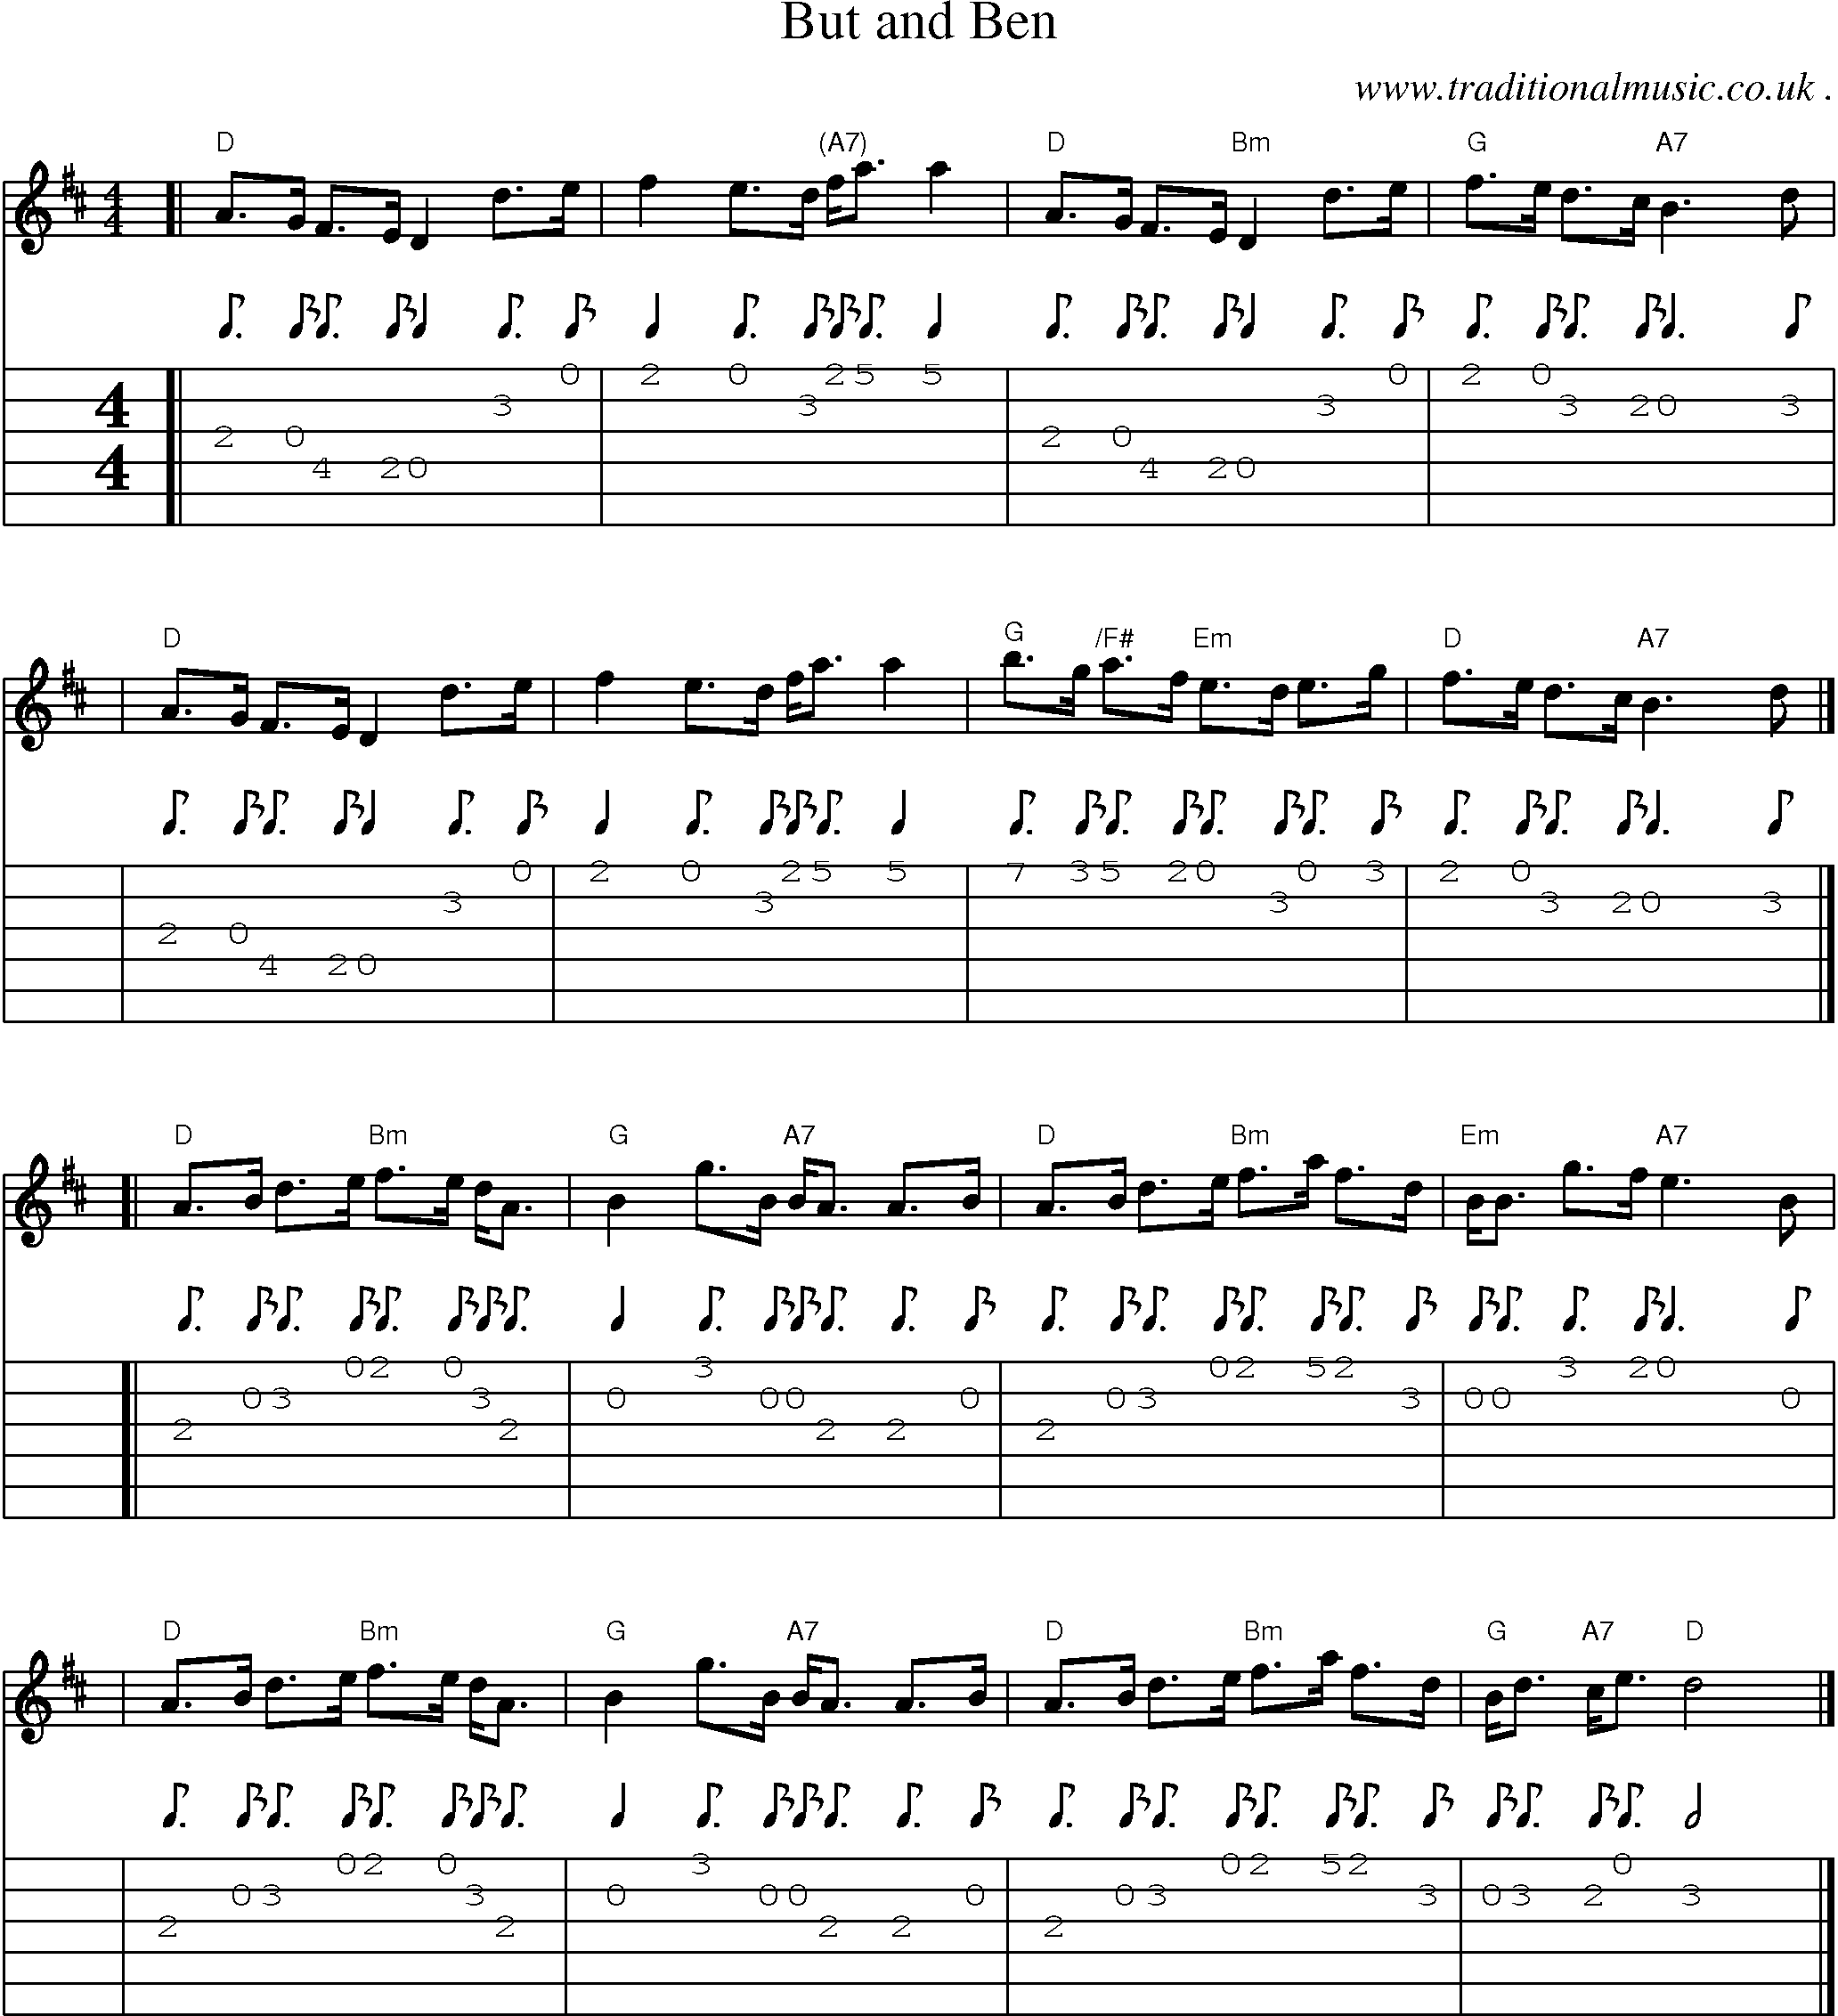 Sheet-music  score, Chords and Guitar Tabs for But And Ben